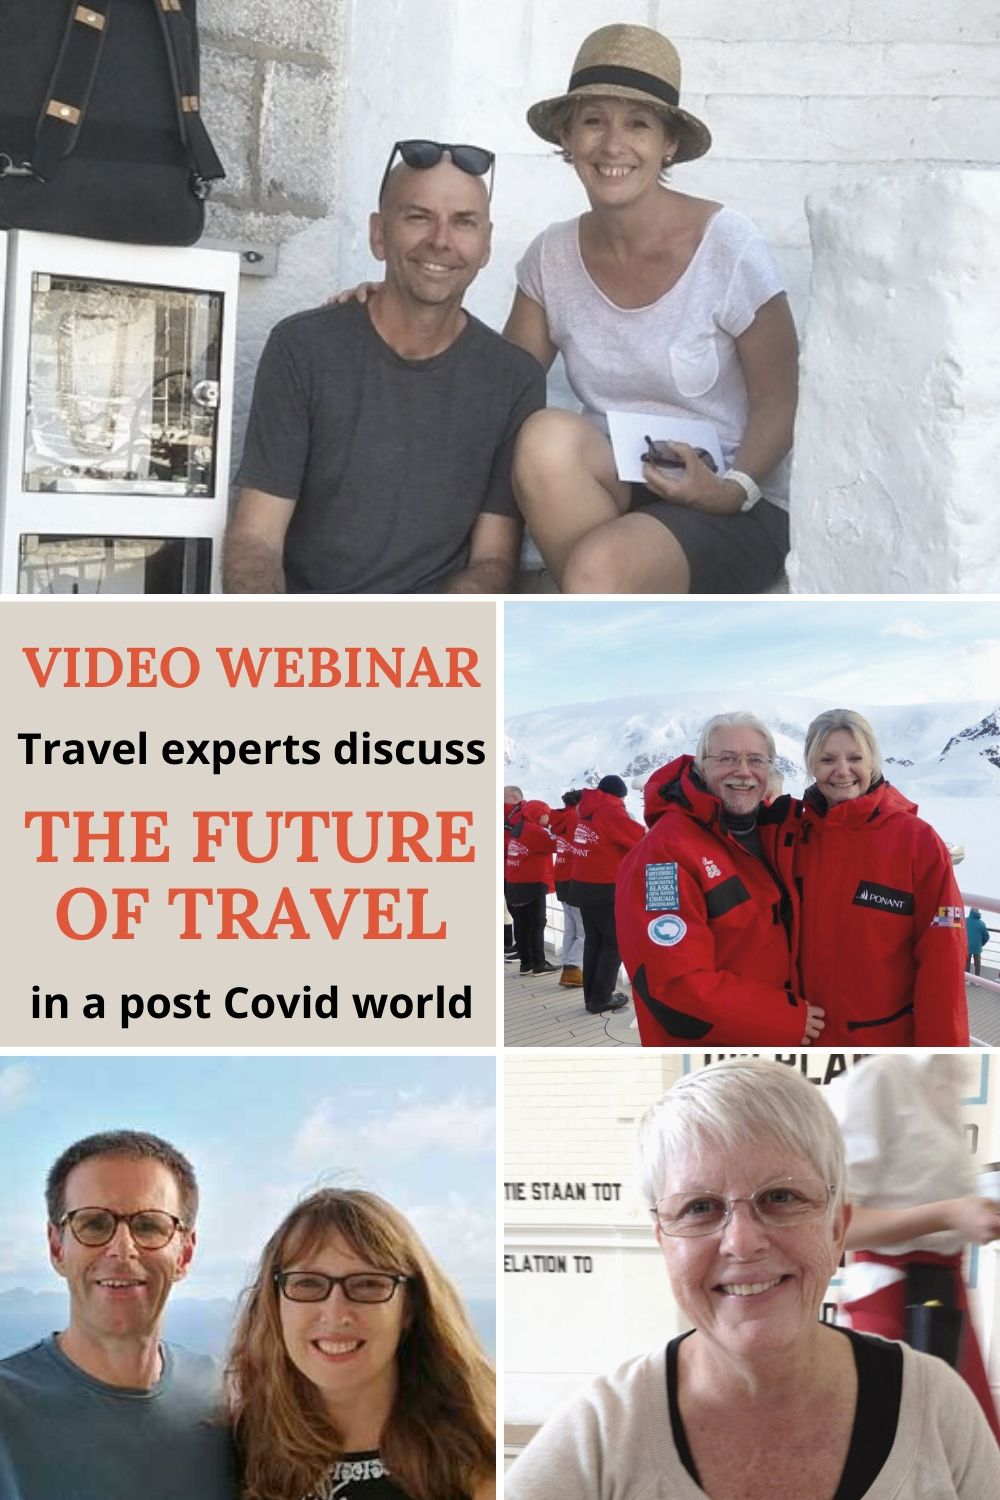 Webinar: The Future of Travel in a Post-COVID World Now Available on YouTube